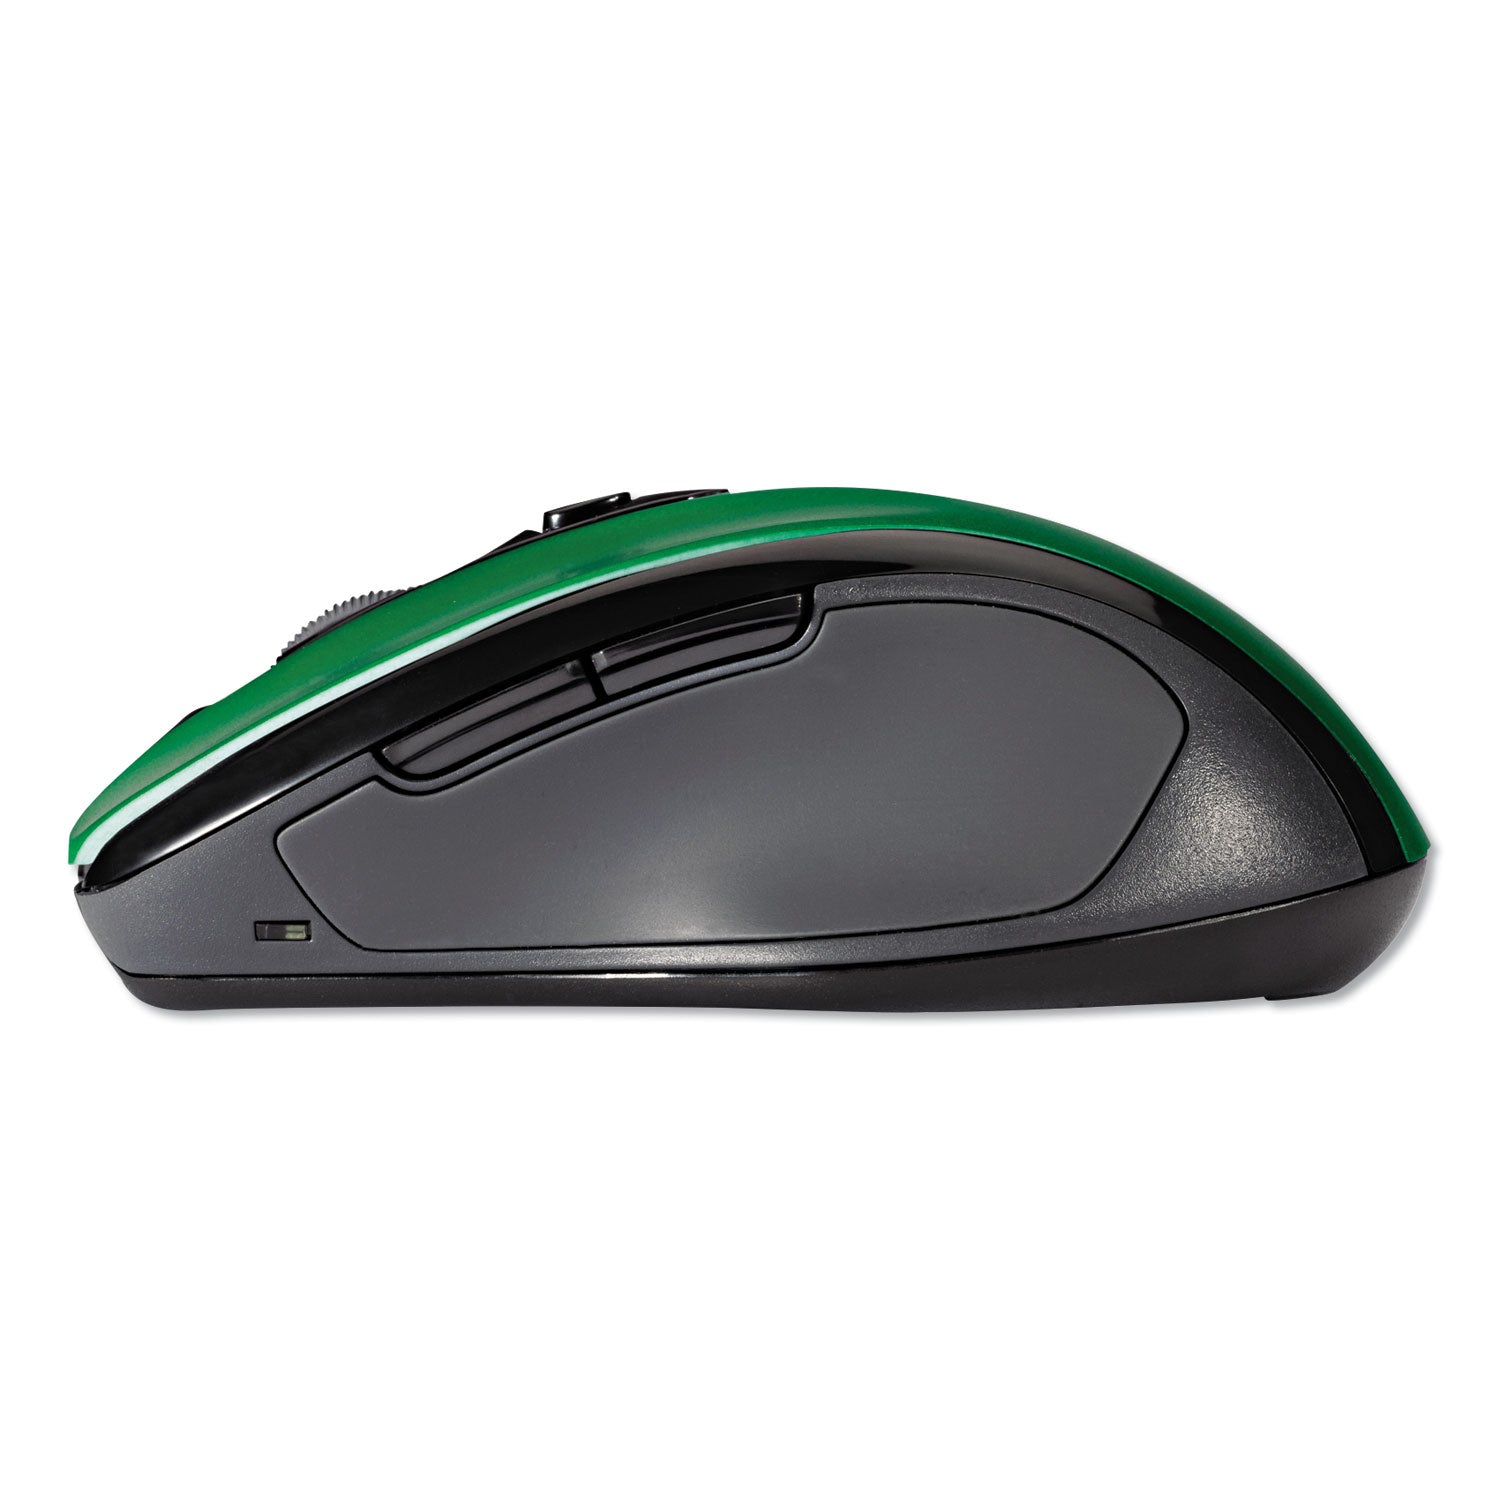 Pro Fit Mid-Size Wireless Mouse, 2.4 GHz Frequency/30 ft Wireless Range, Right Hand Use, Emerald Green - 